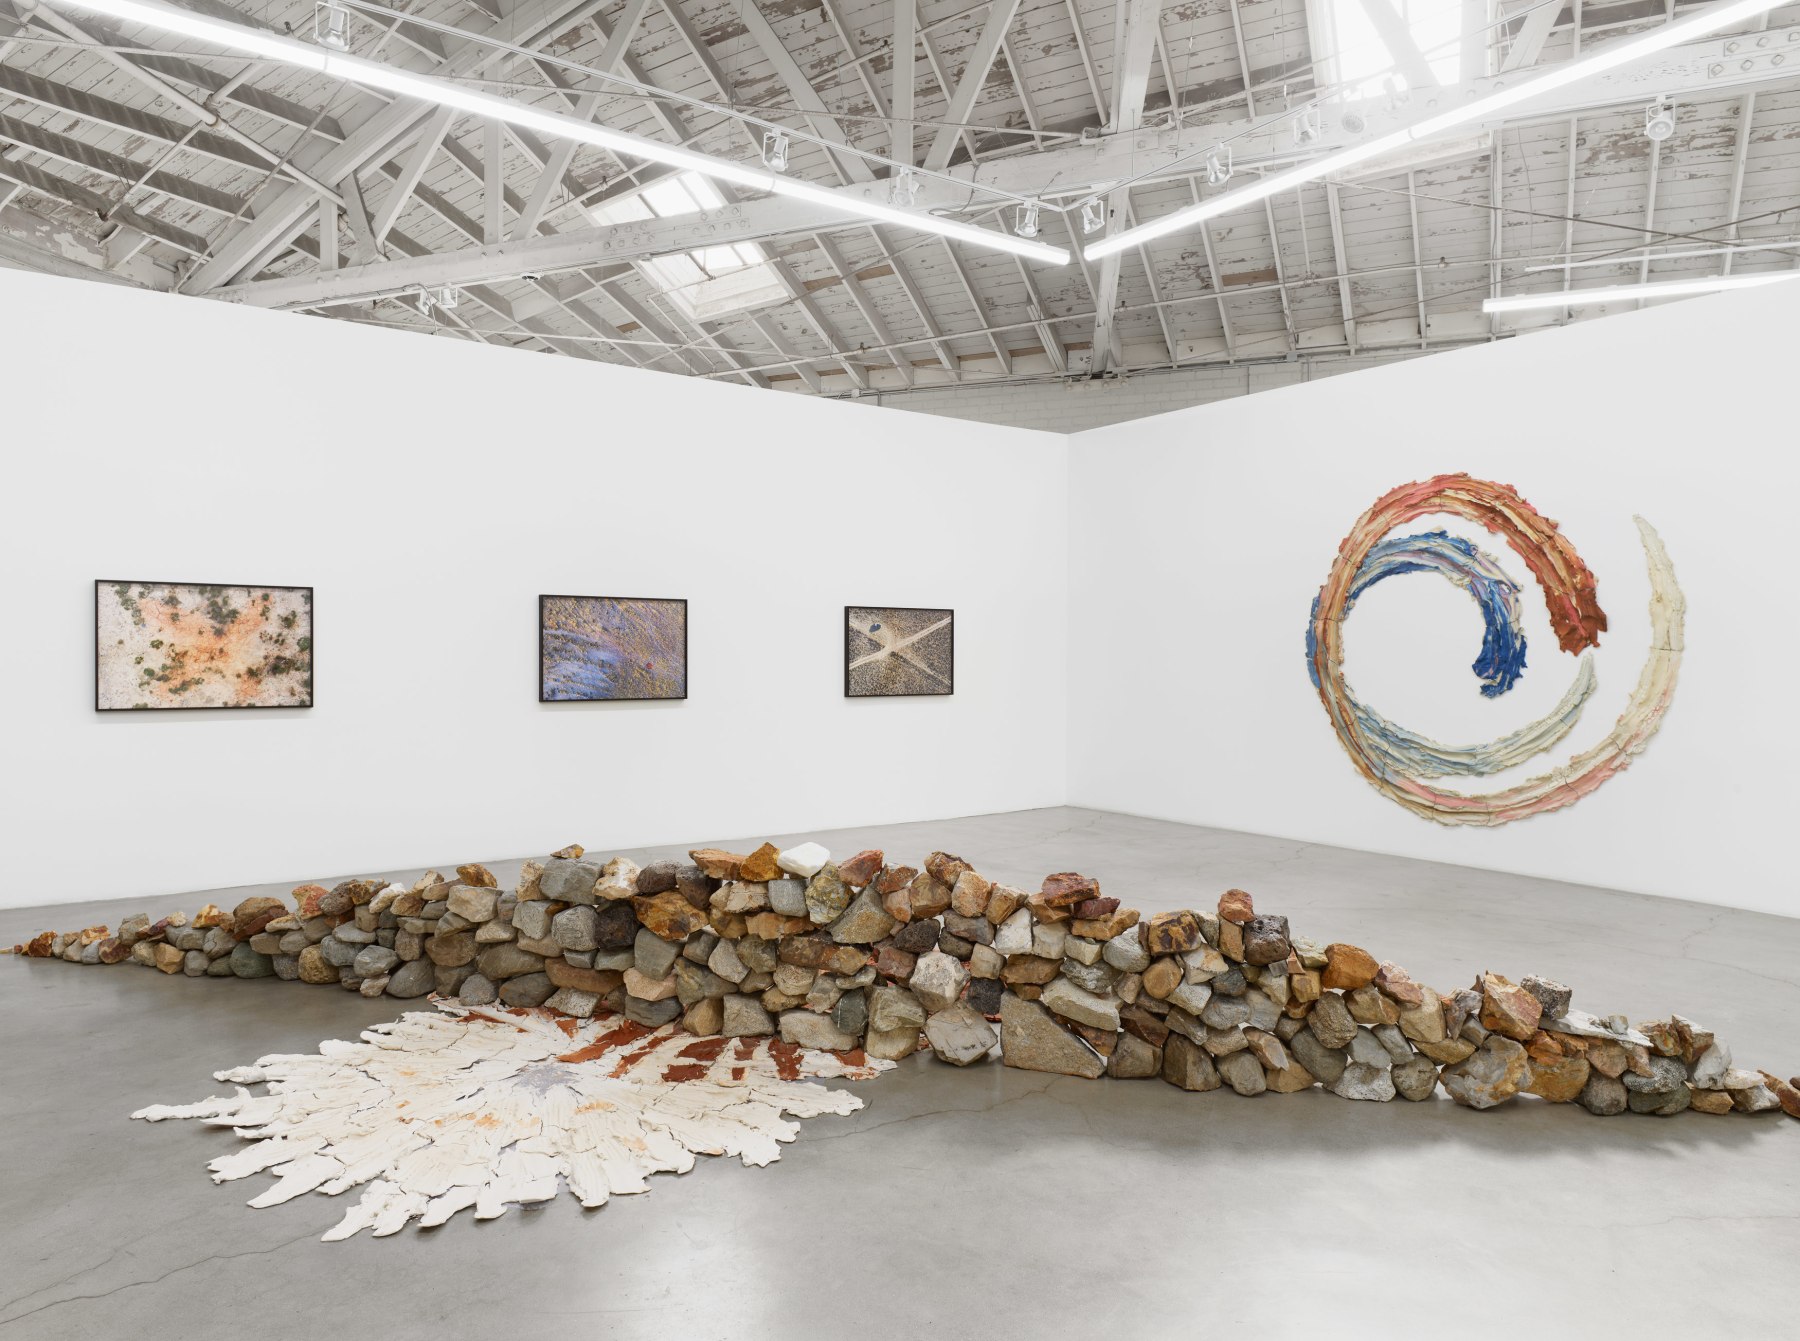 Installation view of Spiraling Open and Closed Like an Aperture, 2020